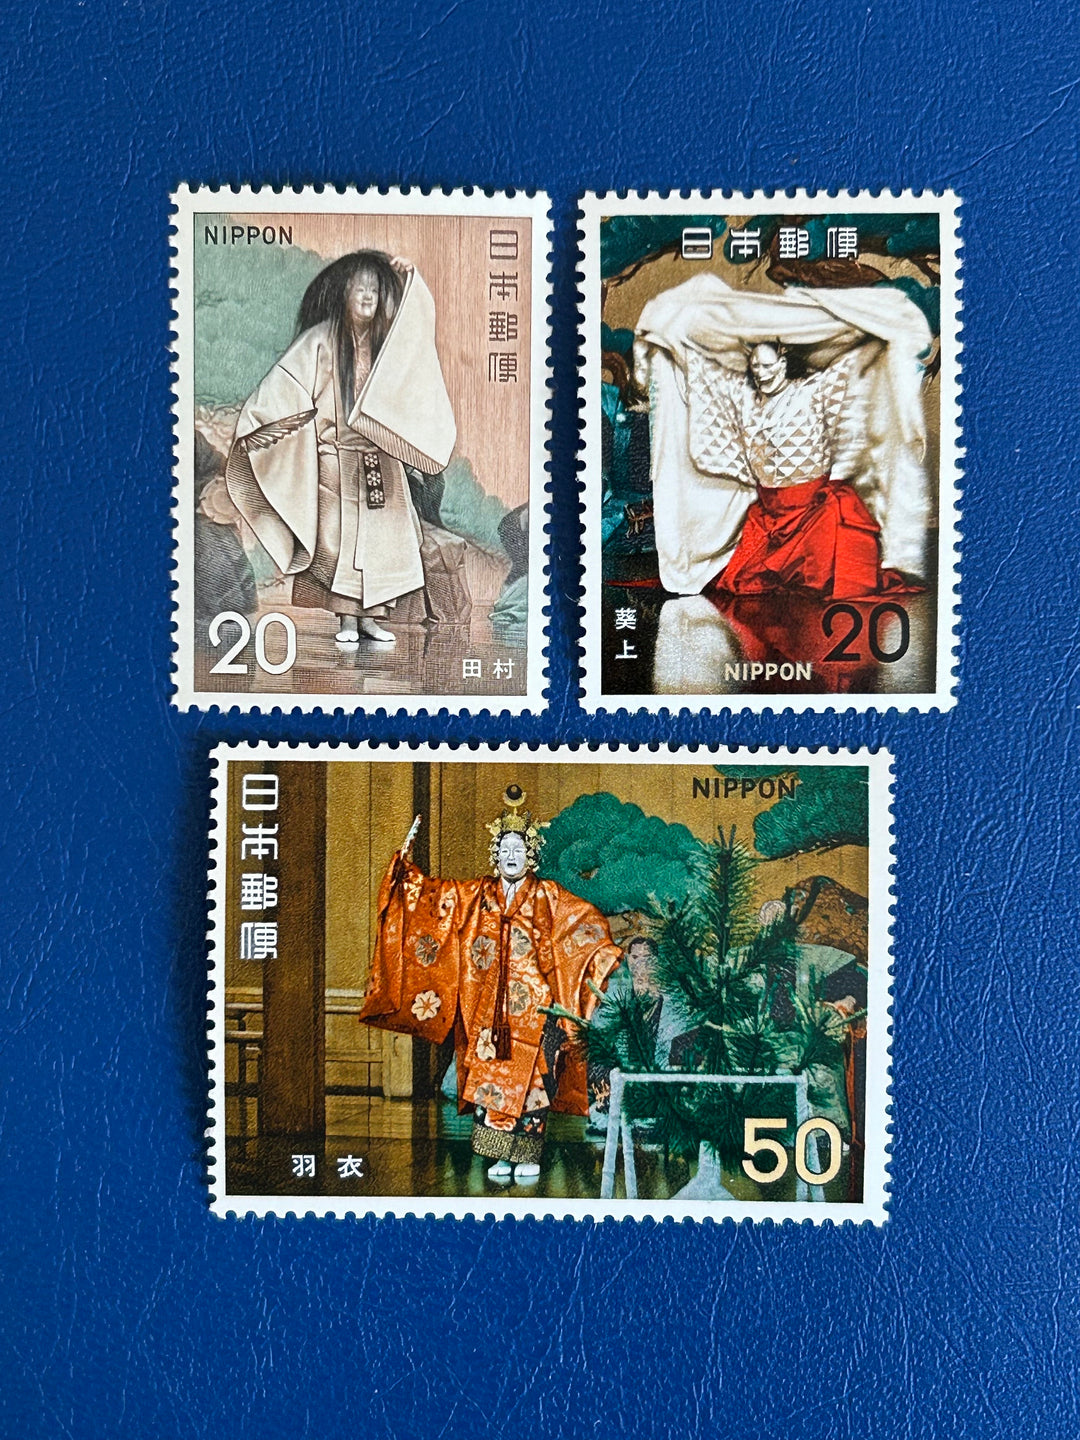 Japan- Original Vintage Postage Stamps- 1972 Theatre - for the collector, artist or crafter - scrapbooks, decoupage, collage